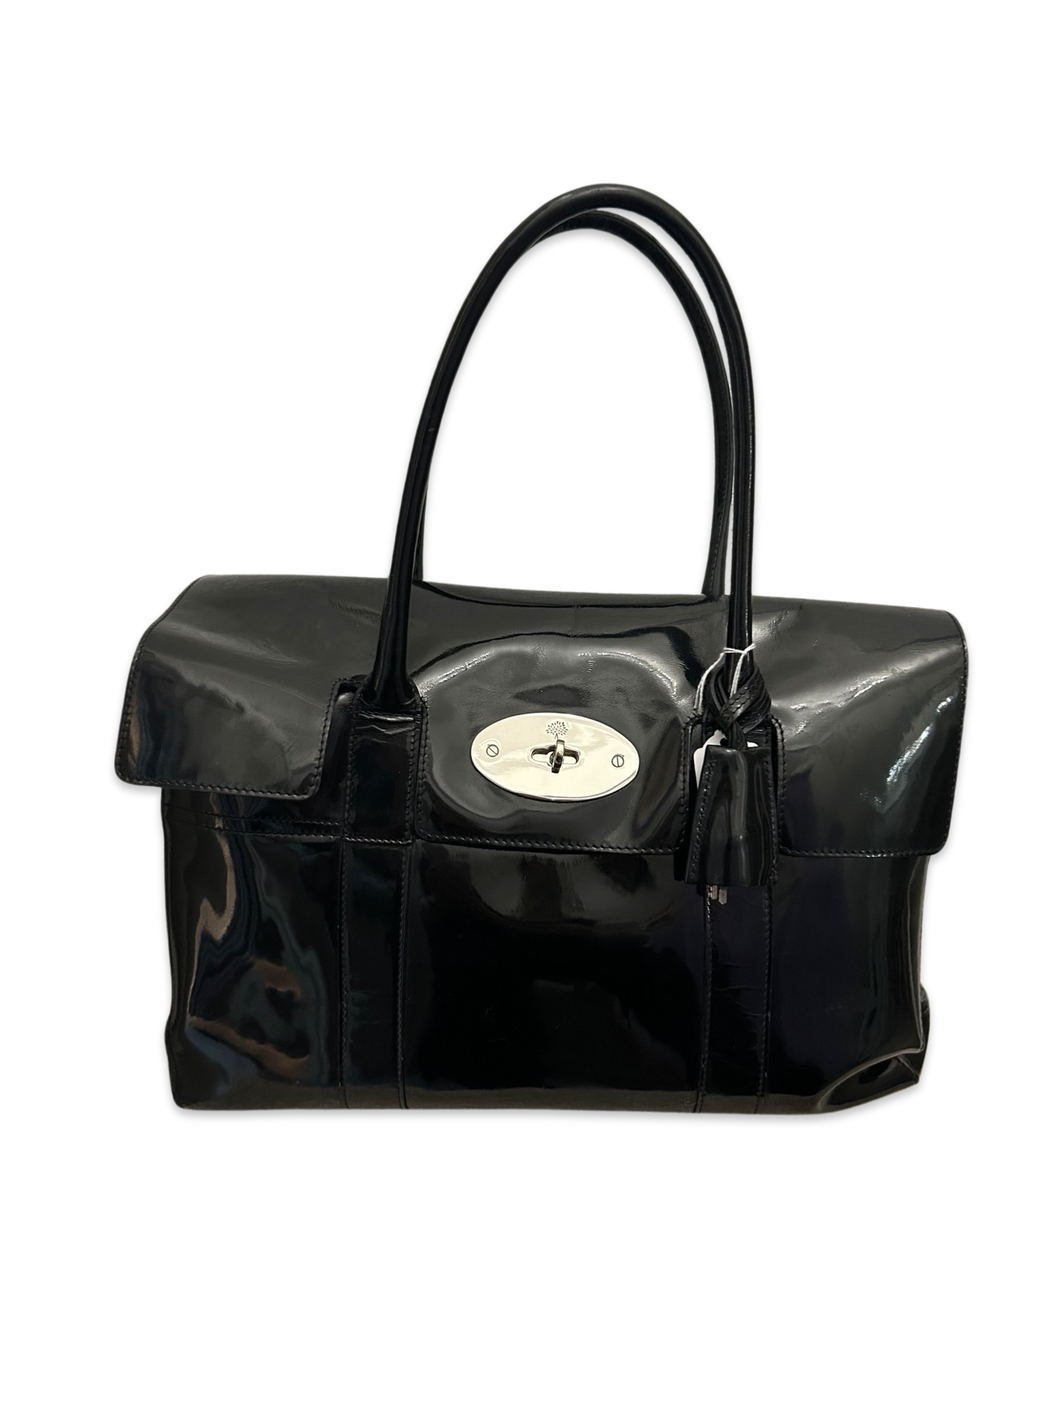 Mulberry Bayswater in Black Patent Leather